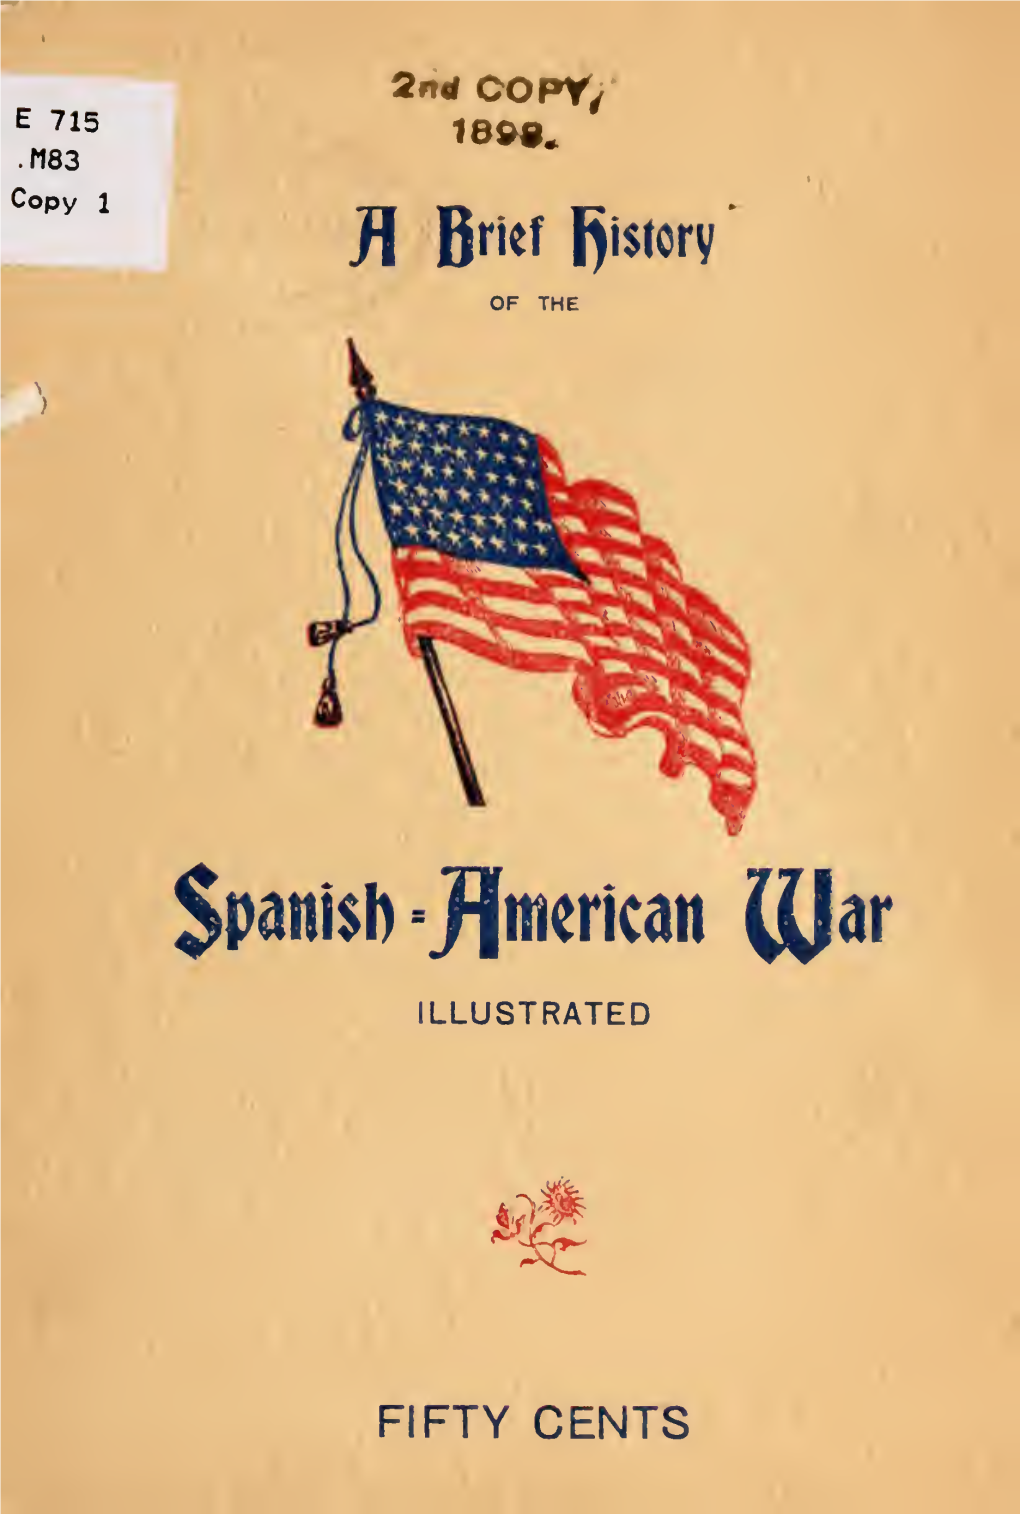 A Brief History of the Conflict Between the United States and Spain, 1898